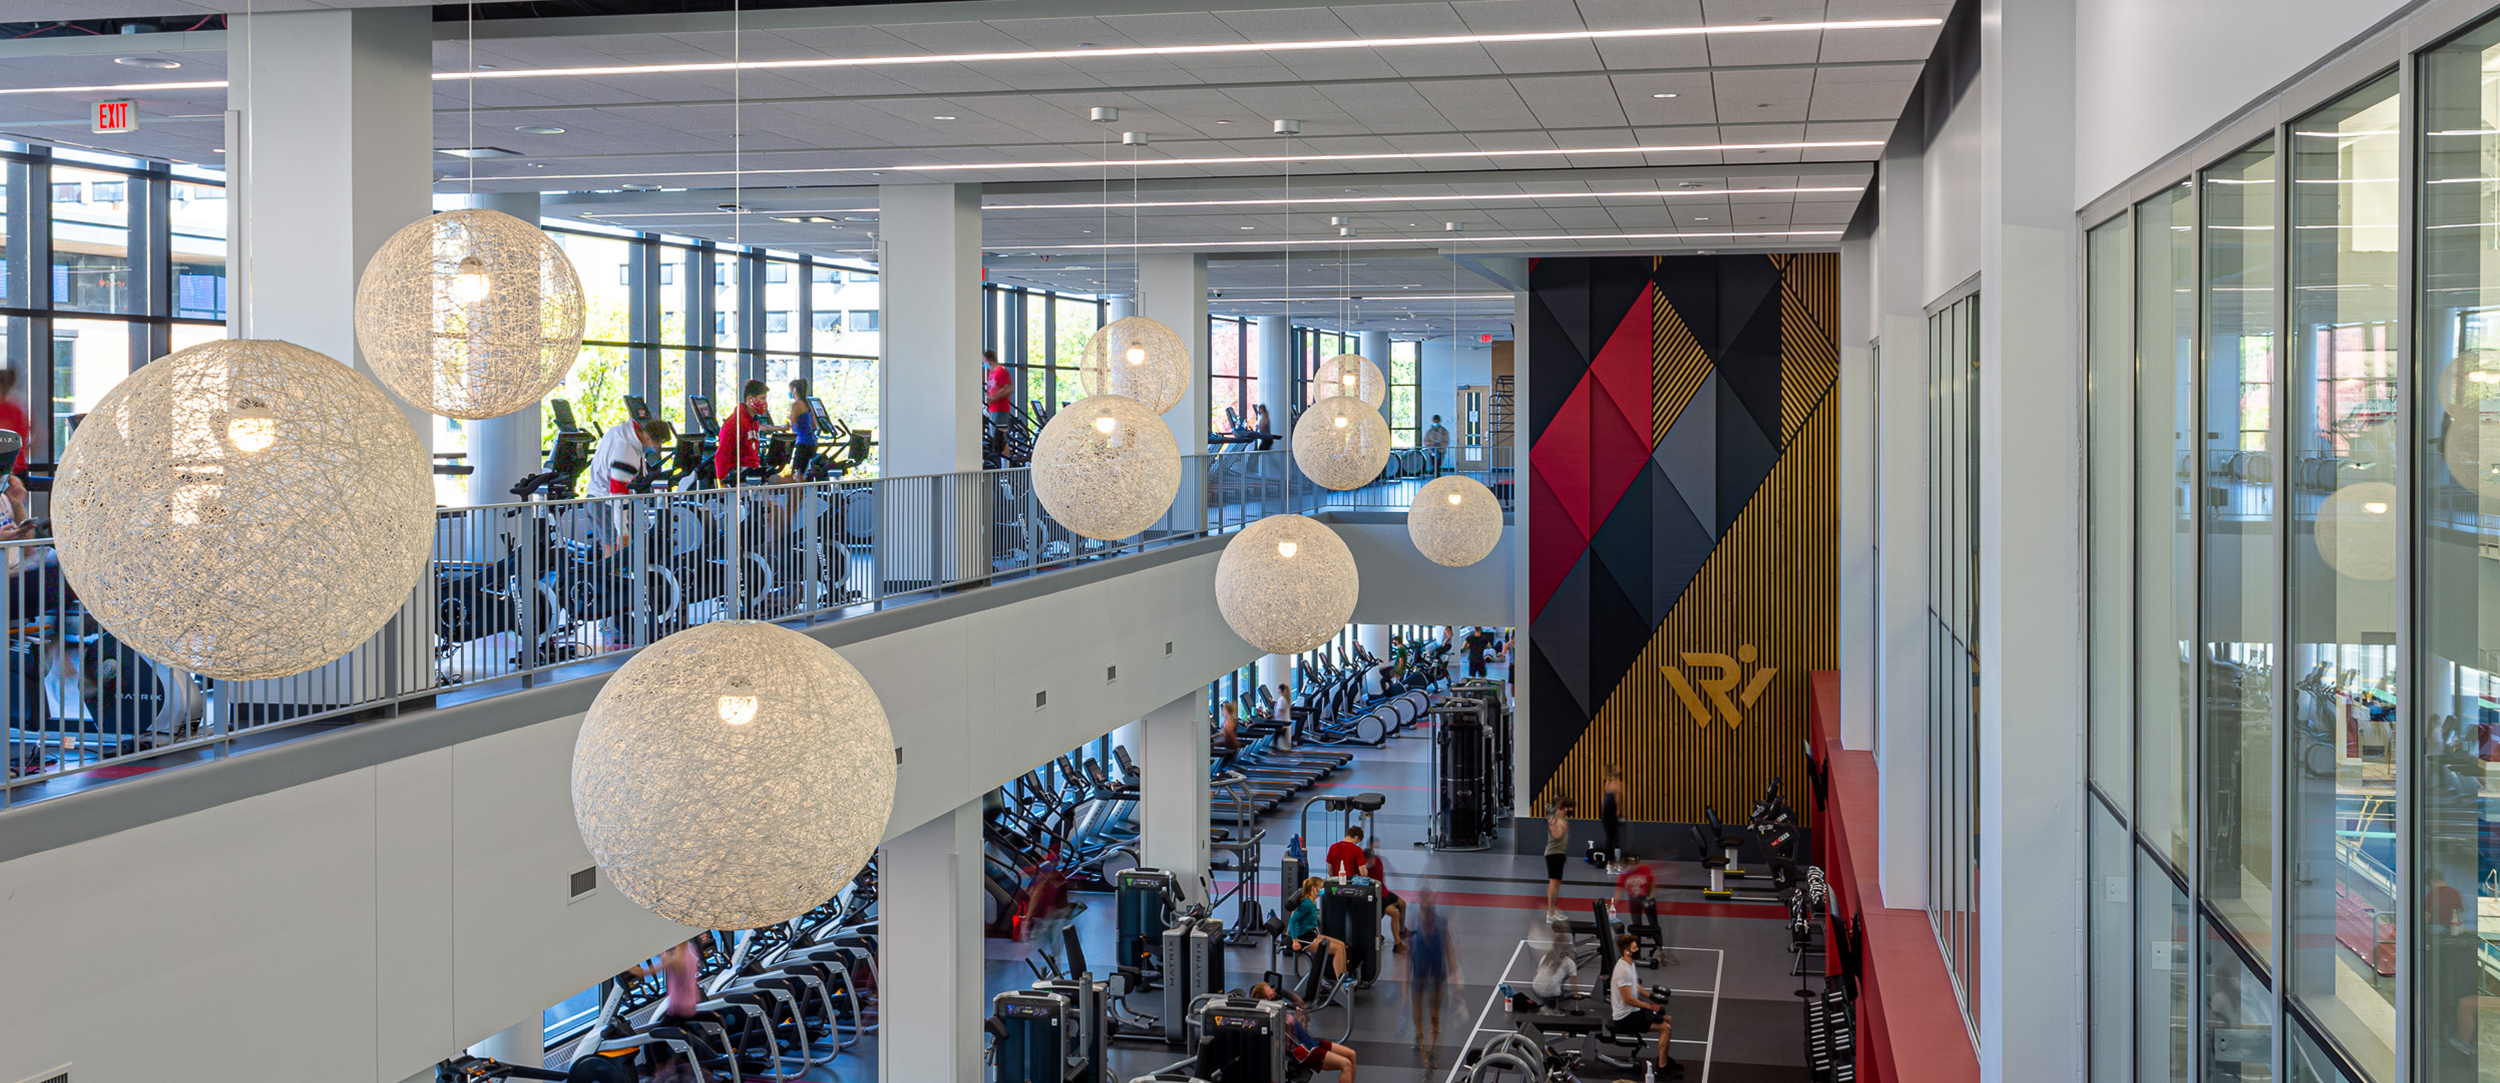 University Of Wisconsin - Recreation & Wellbeing Fitness Feature Wall